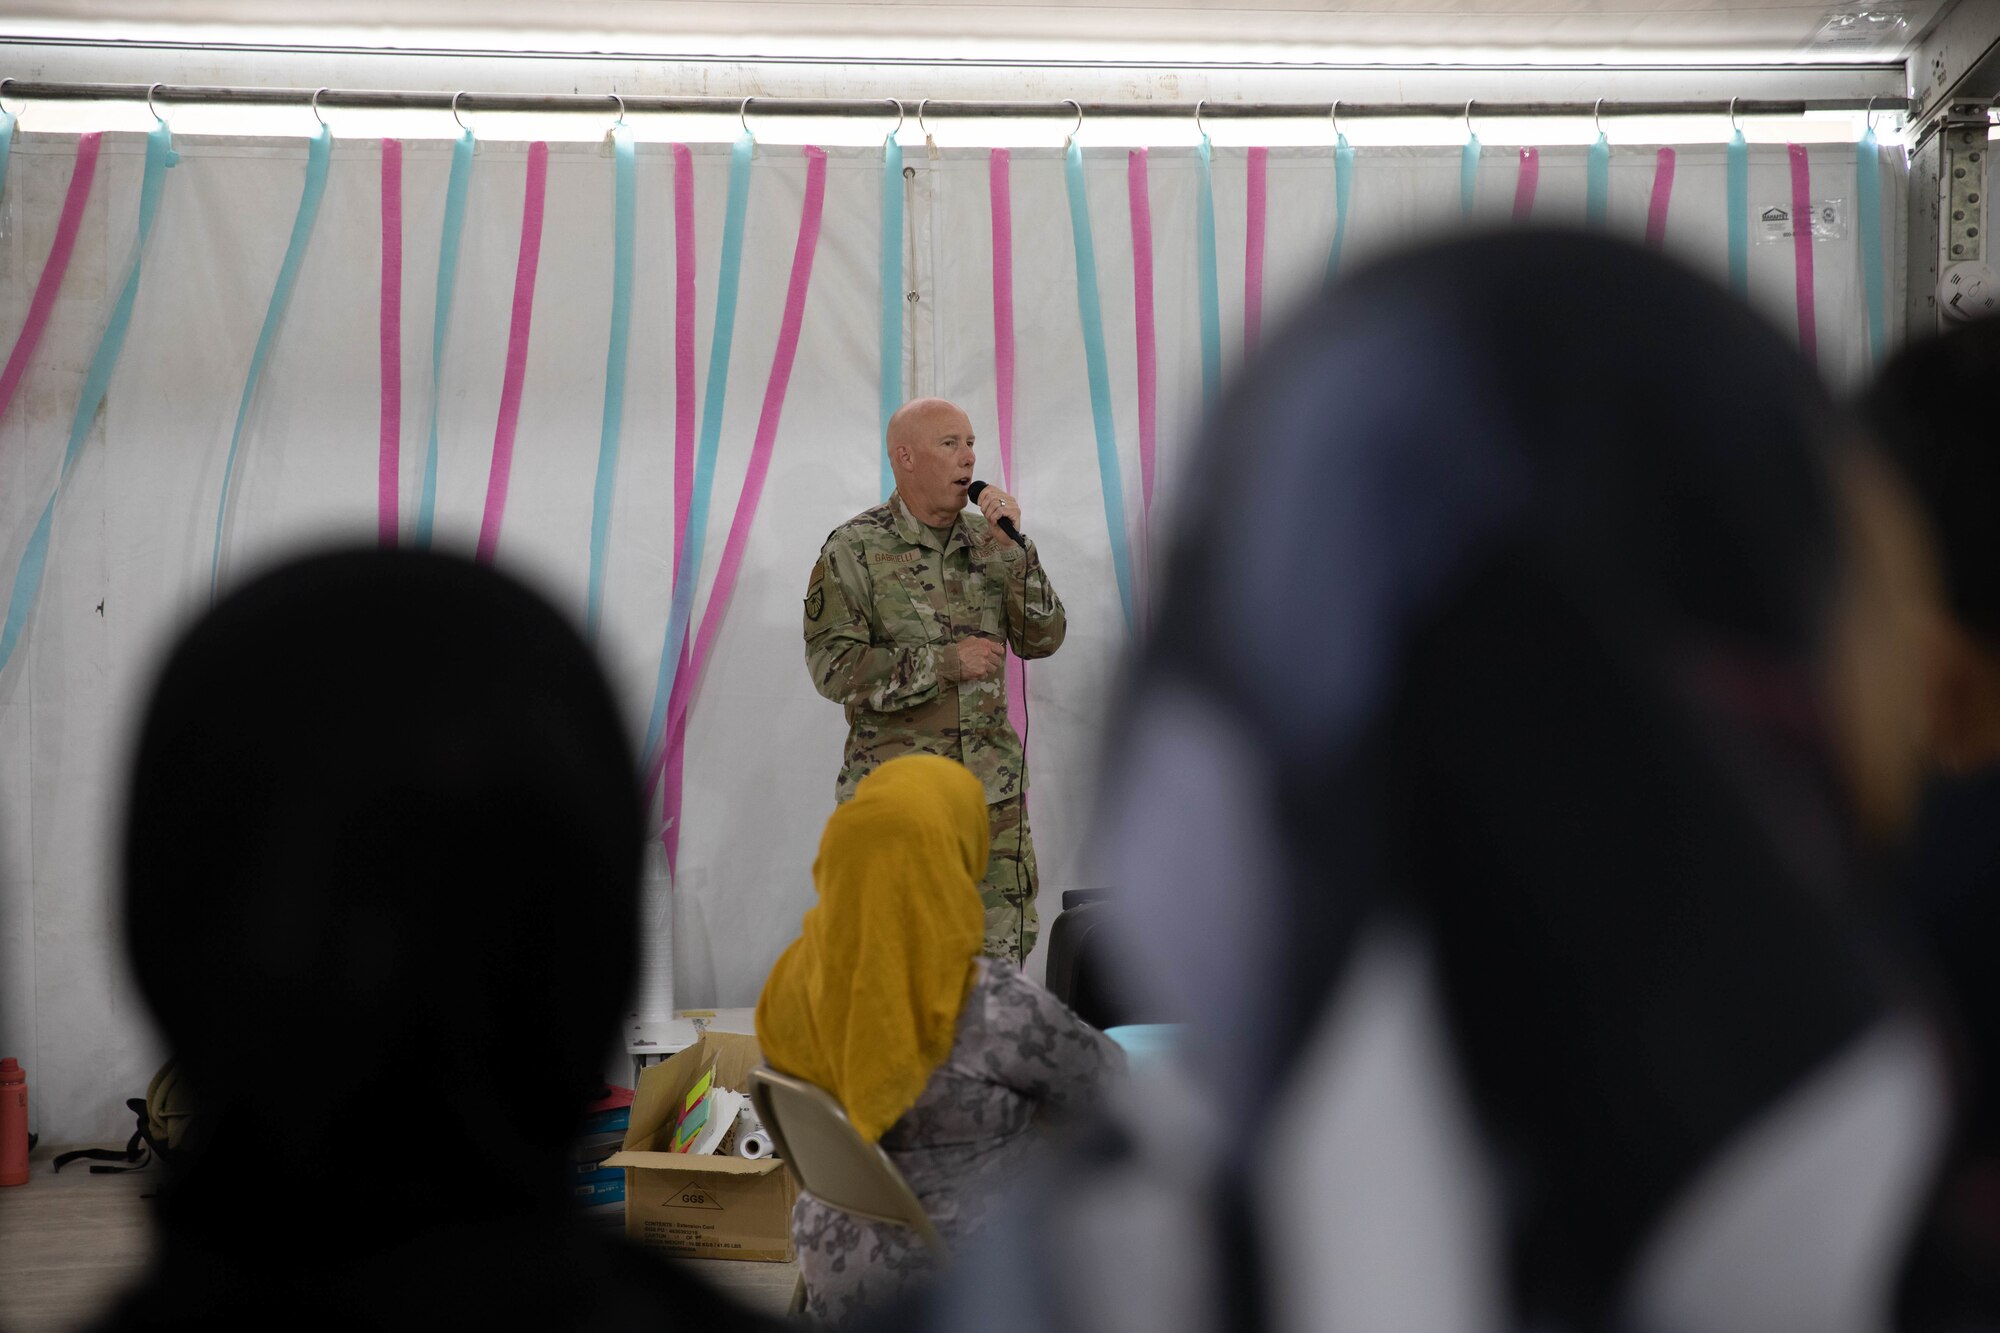 U.S. Air Force Brig. Gen. Daniel Gabrielli, Task Force Holloman commander, speaks to a crowd of Afghan evacuees during the opening of a new education center at Aman Omid Village on Holloman Air Force Base, New Mexico, Oct. 19, 2021. The Department of Defense, through U.S. Northern Command, and in support of the Department of Homeland Security, is providing transportation, temporary housing, medical screening, and general support for at least 50,000 Afghan evacuees at suitable facilities, in permanent or temporary structures, as quickly as possible. This initiative provides Afghan personnel essential support at secure locations outside Afghanistan. (U.S. Army Photo By Pfc. Anthony Ford)